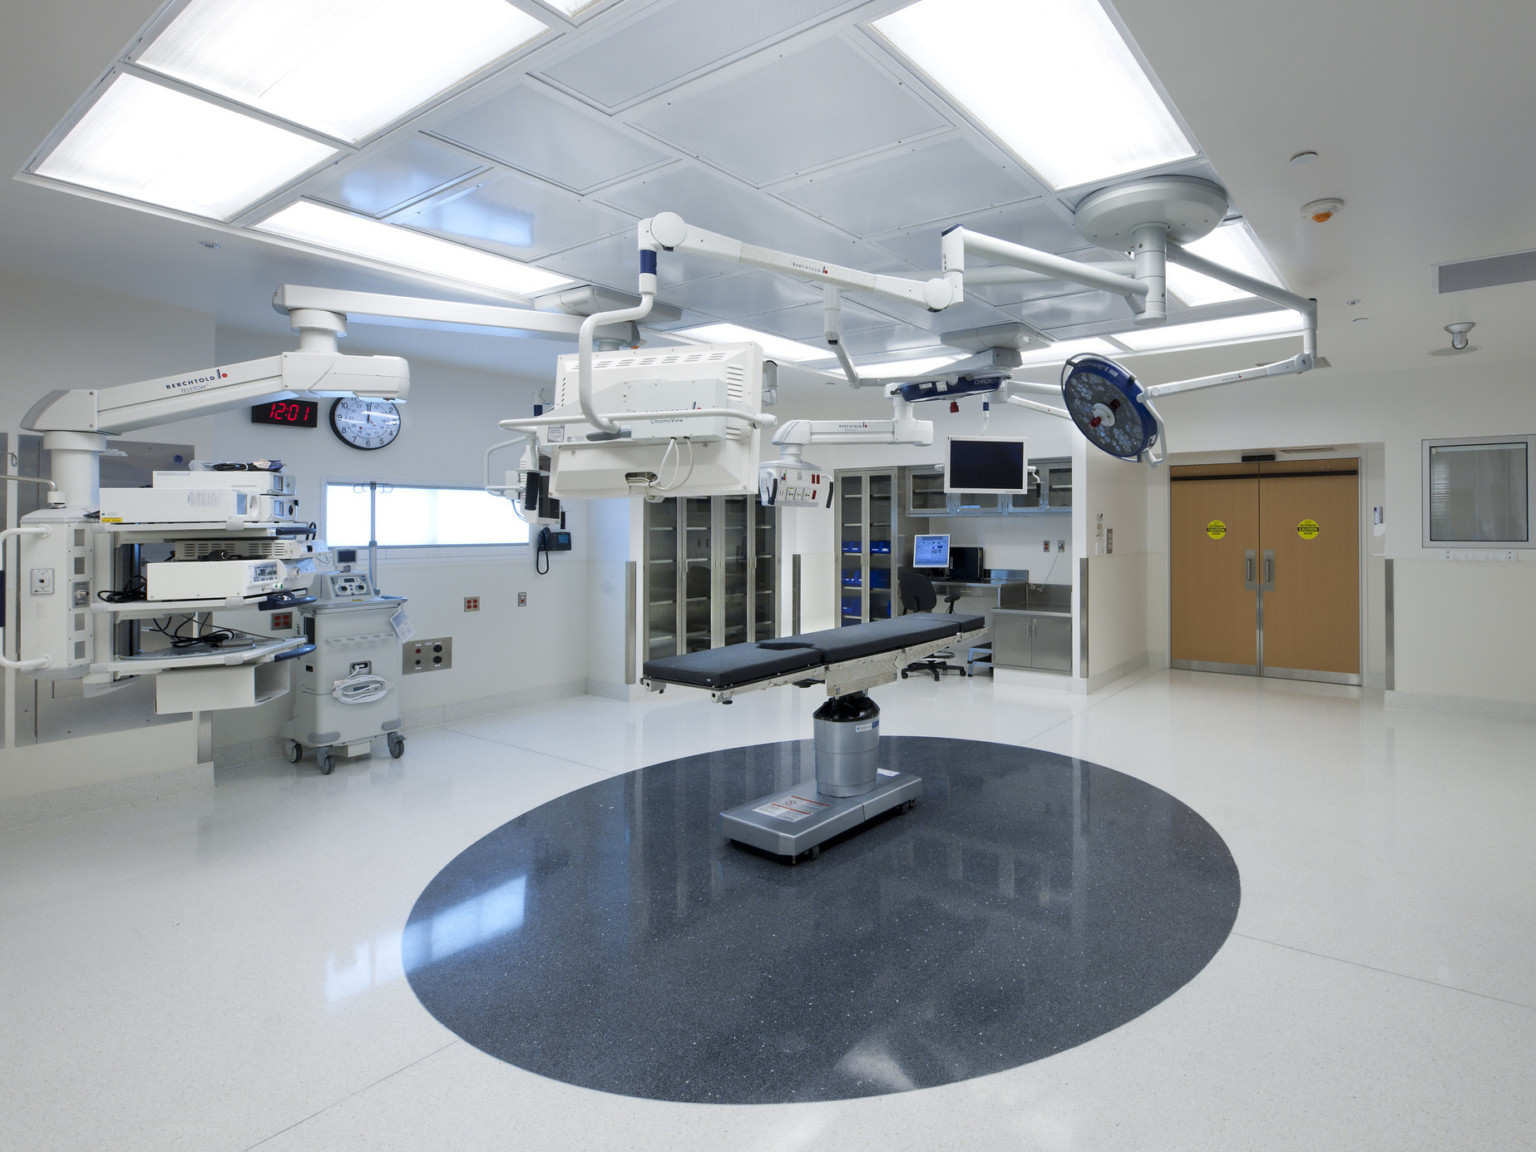 Operating room with table centered over tiled circle in floor. Screens and large circular light fixture suspended from above